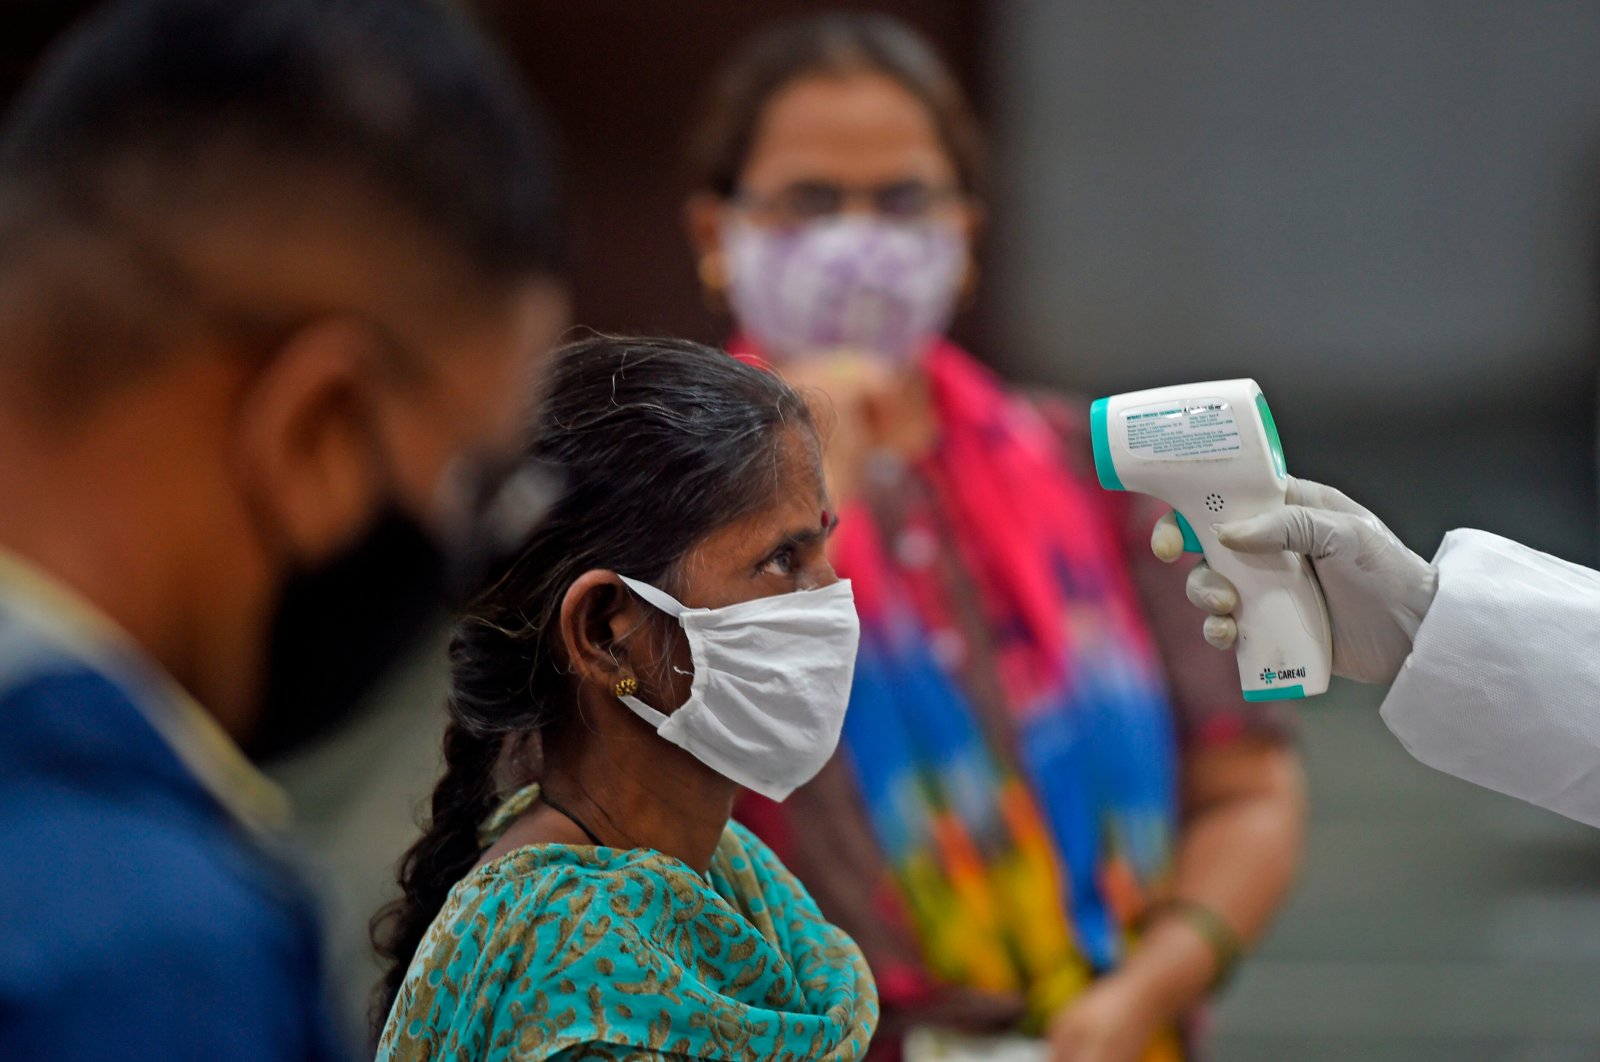 A medical volunteer takes a temperature reading of a woman at a marriage hall, Mumbai, India, July 17, 2020. (AFP Photo)